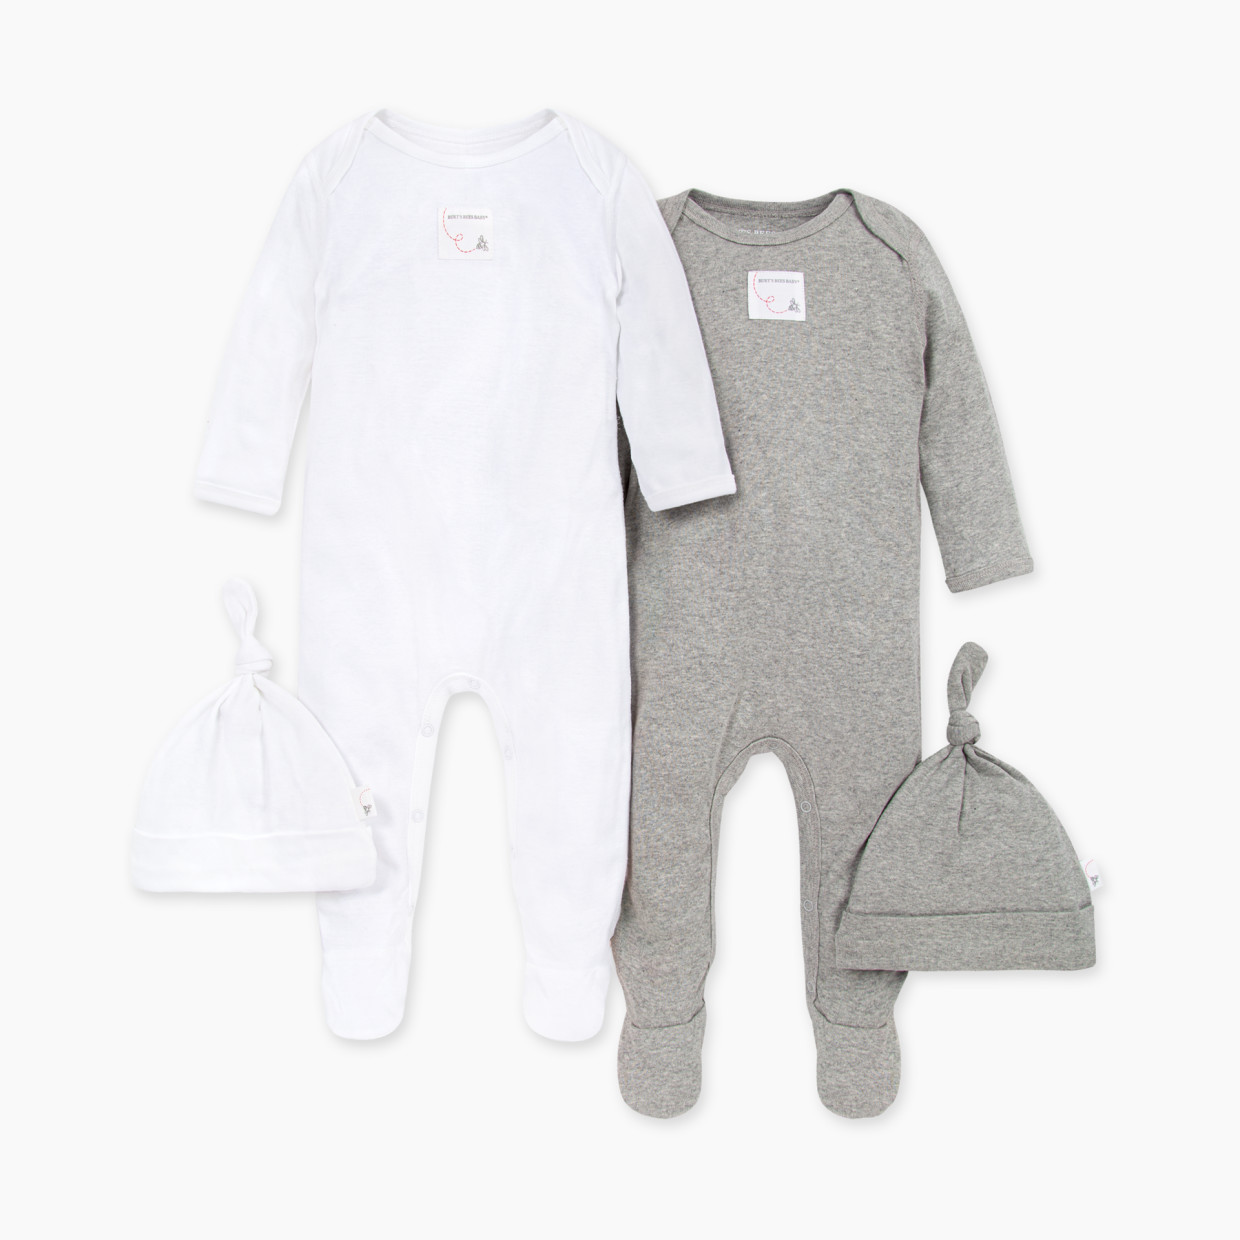 Burt's Bees Baby Organic Footed Coverall & Knot Top Hat (2 Pack) - Heather Grey/Cloud, Newborn.